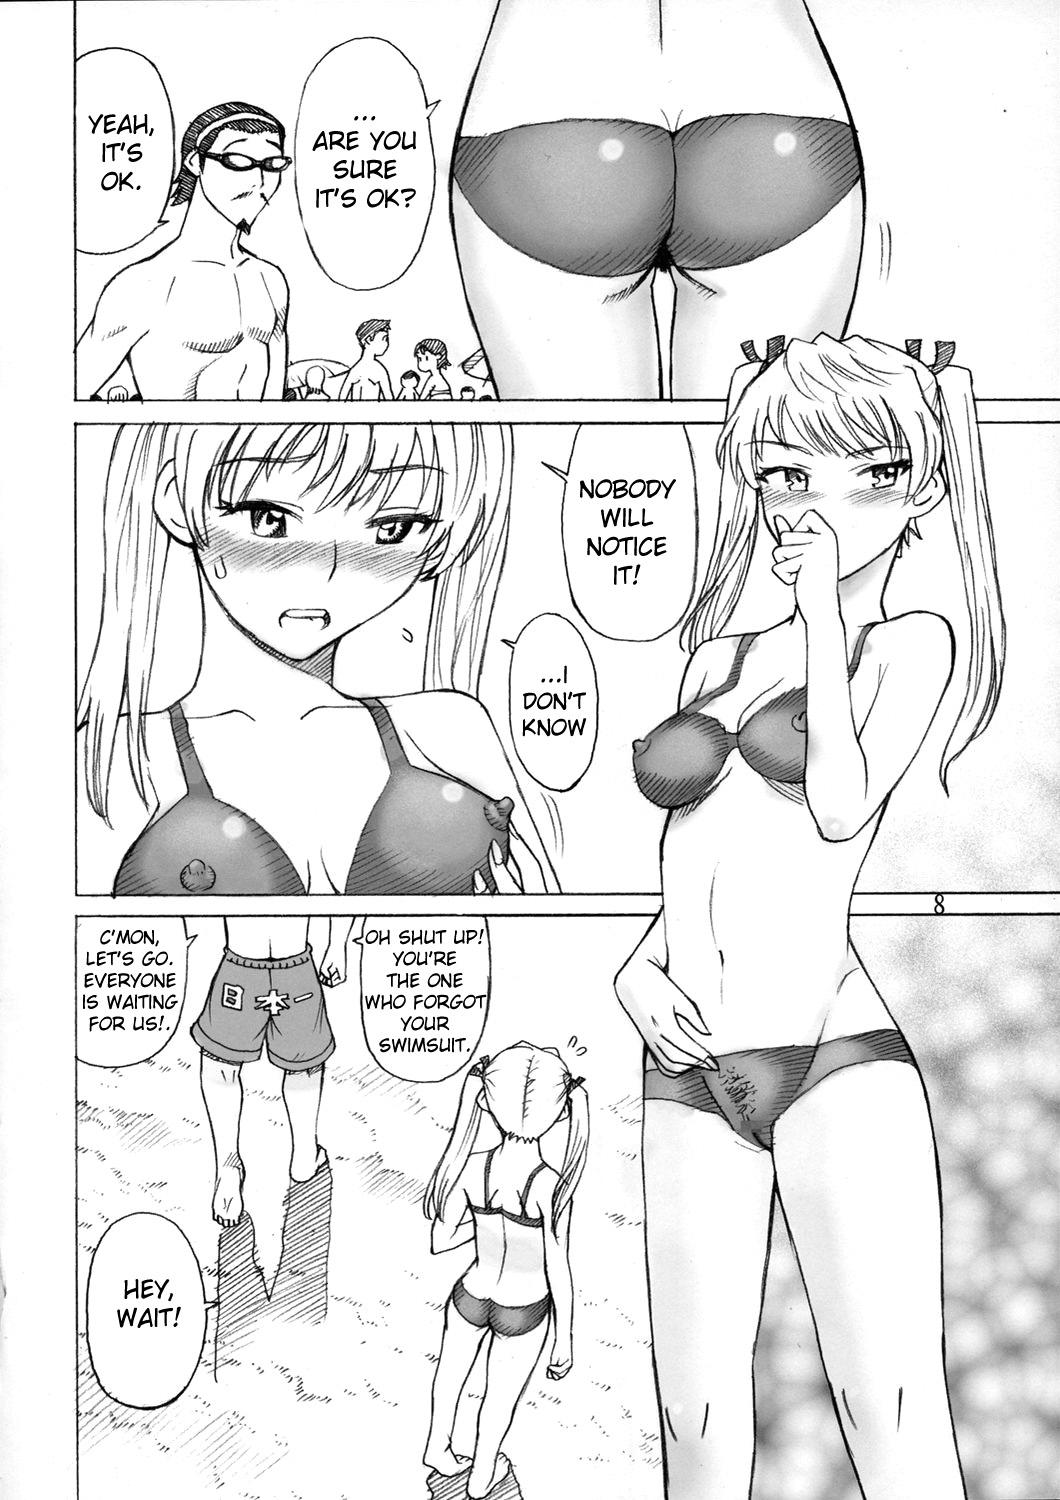 1080p Thrust Rumble - School rumble Anal Porn - Page 7